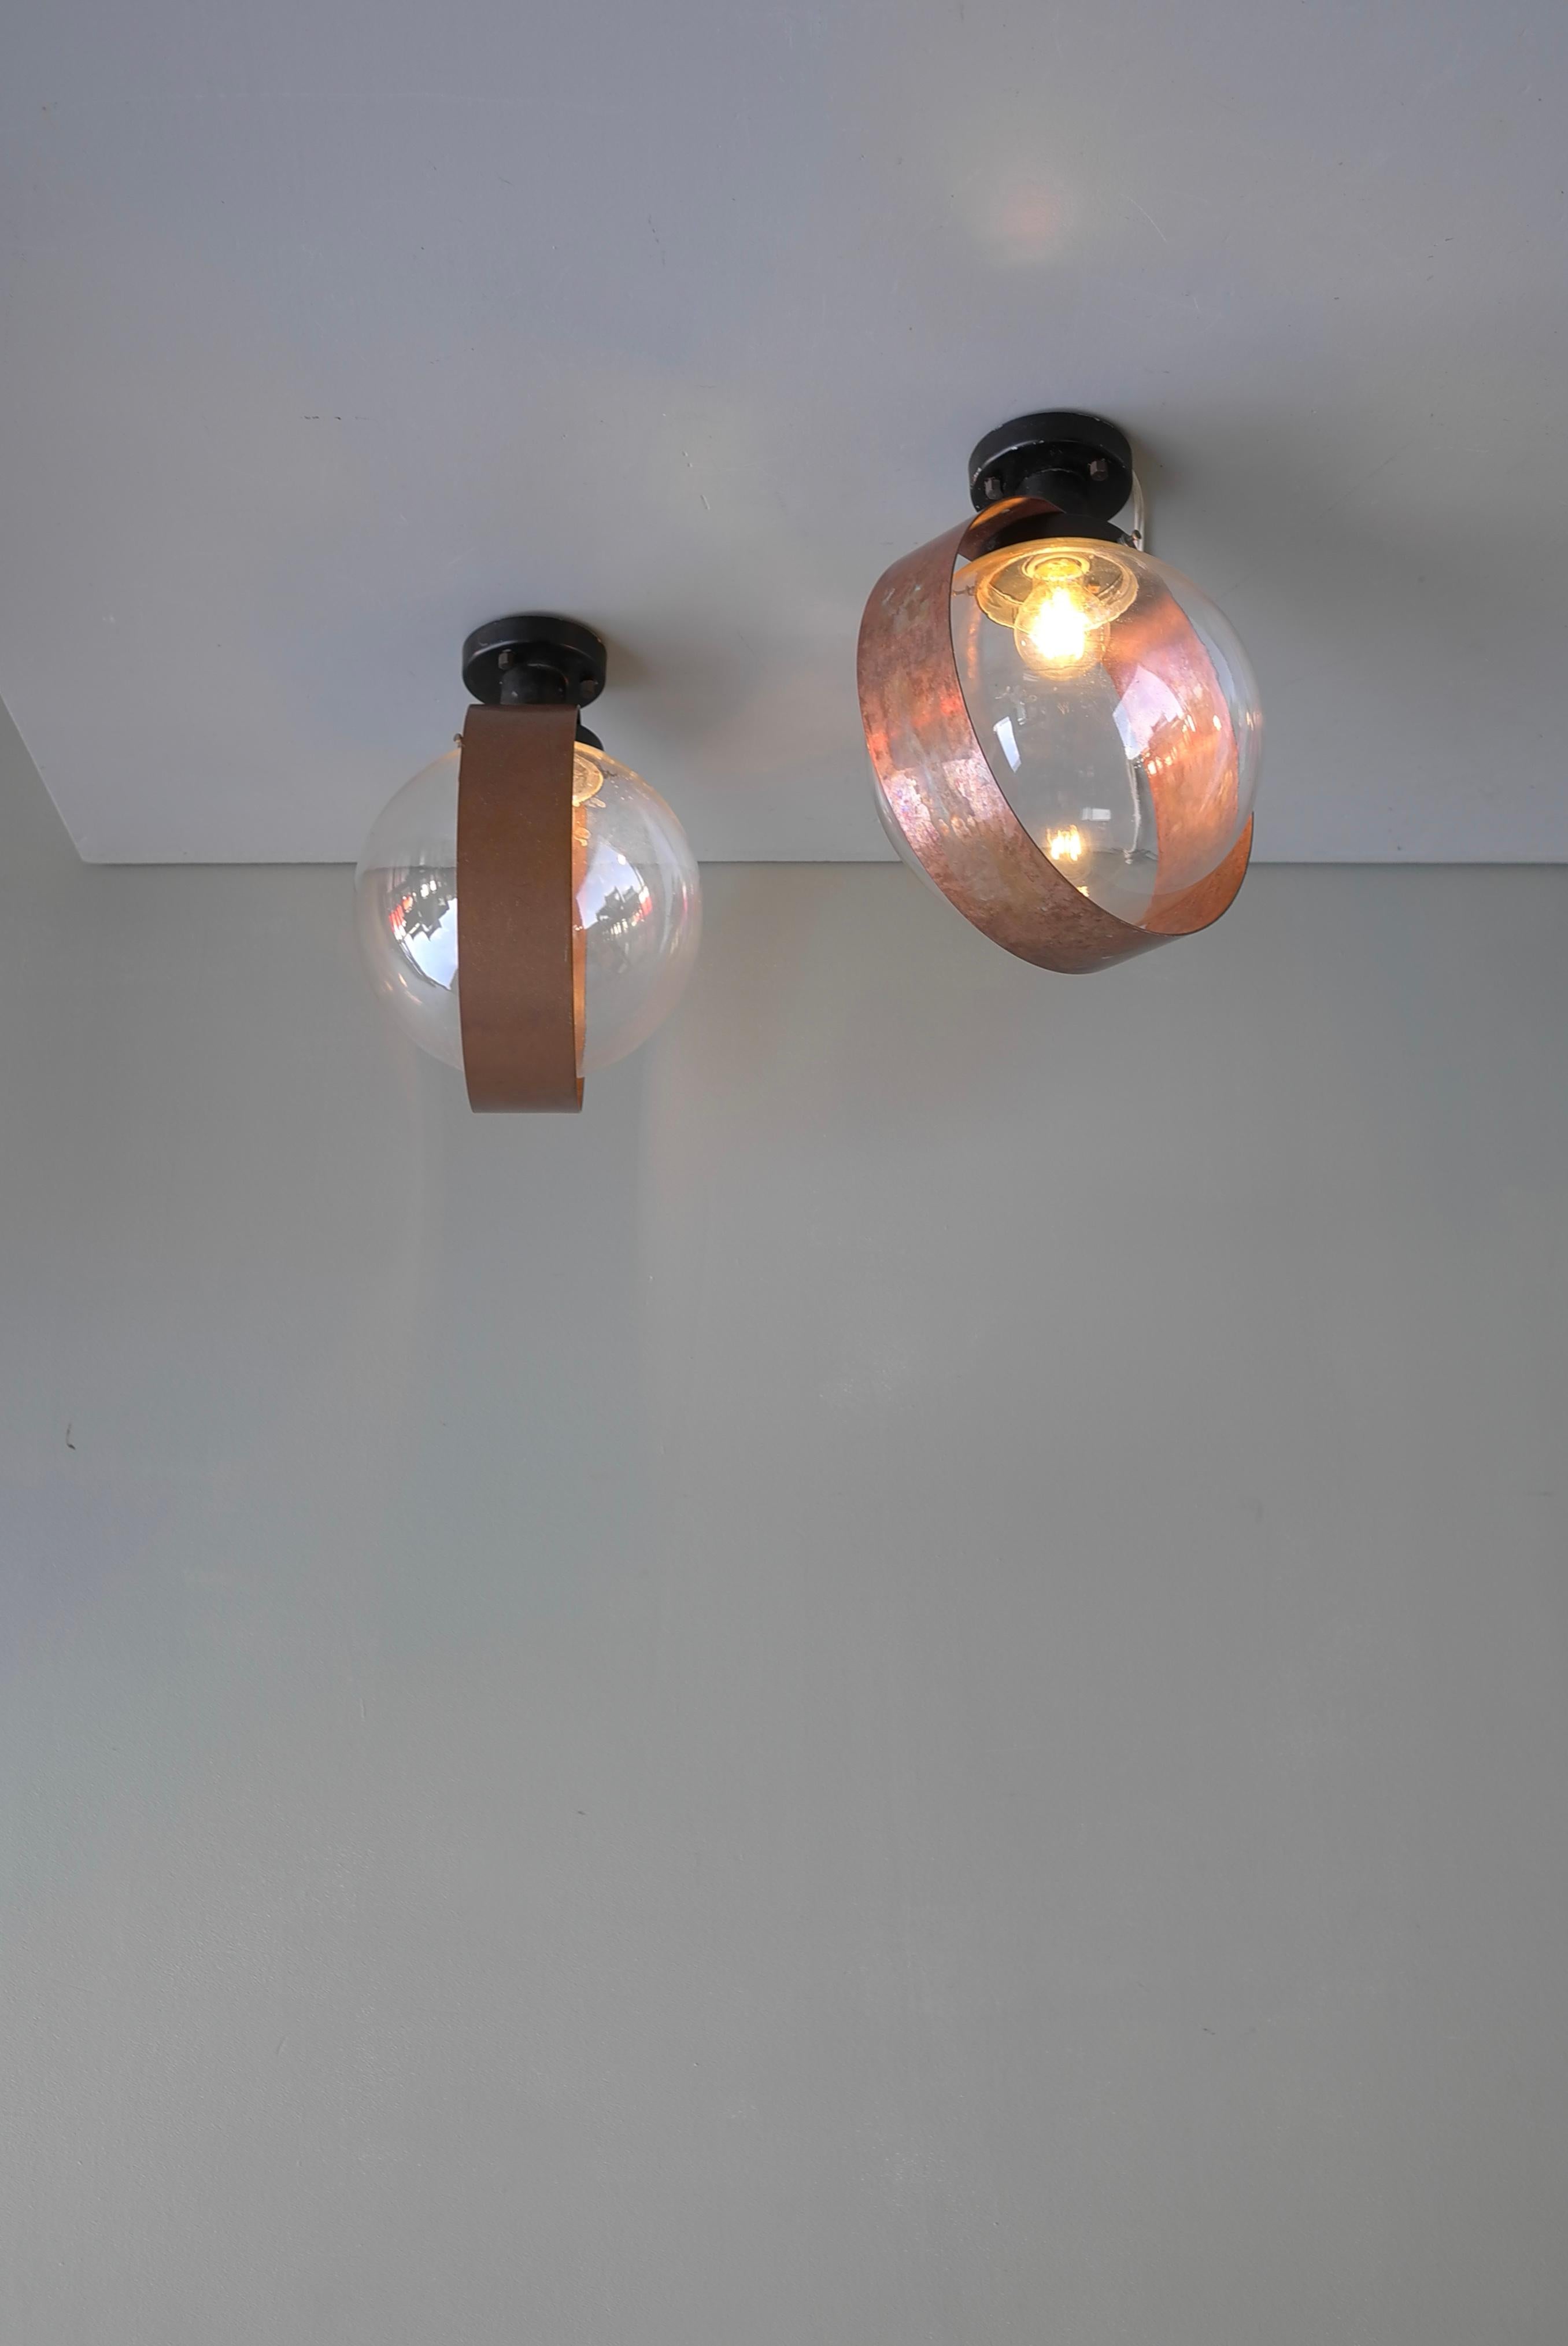 Pair of Scandinavian Glass Ball Wall lamps with Copper Patina Rims, 1960's For Sale 6